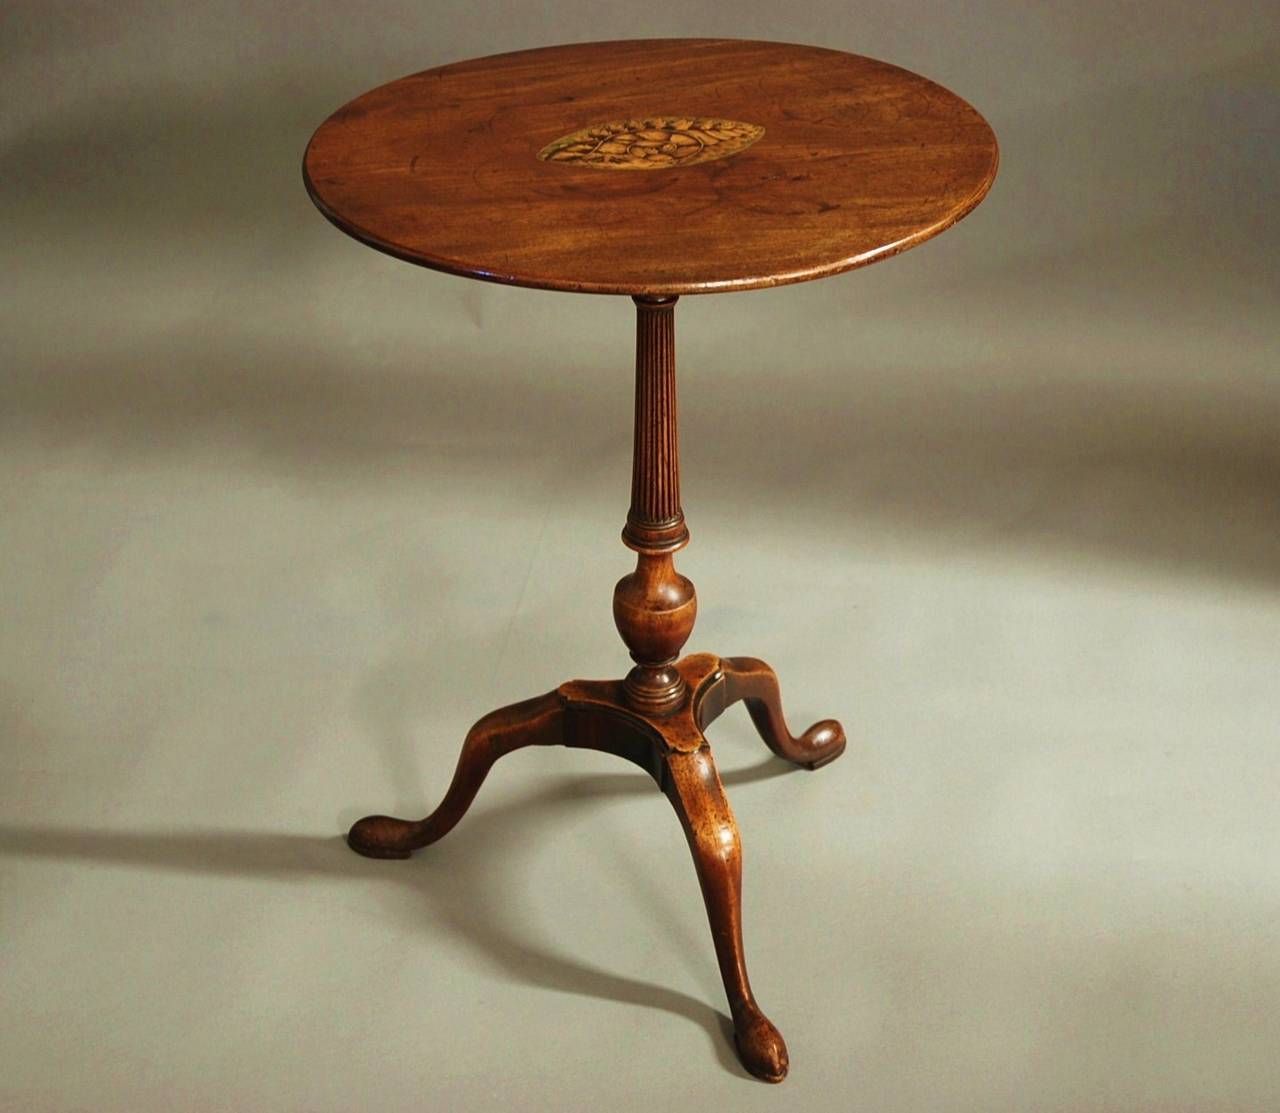 An 18th century tripod occasional table/wine table of oval form of good patina (color).

This table consists of a finely figured solid mahogany oval top with oval inlaid shell and leaf decoration in boxwood and stained sycamore.

This leads down